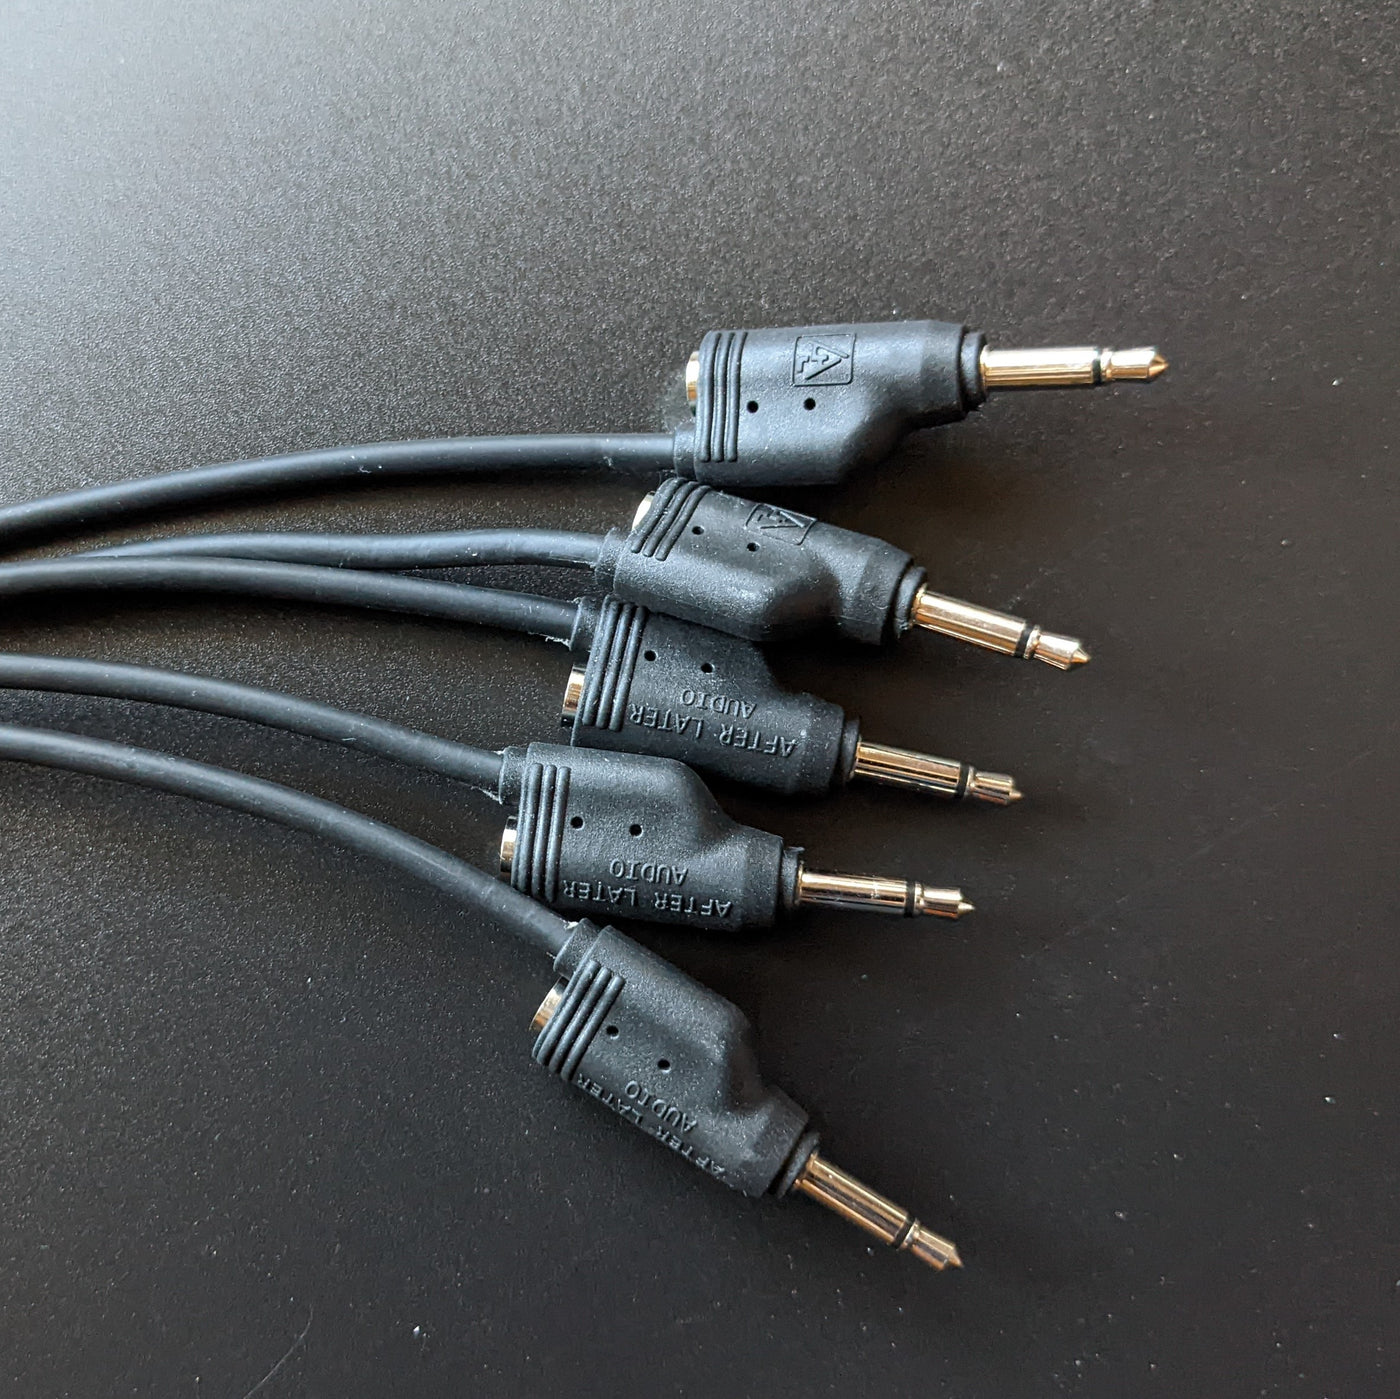 Double-end Stackable Patch Cable in Packs of 5 - Black (shorter connector)